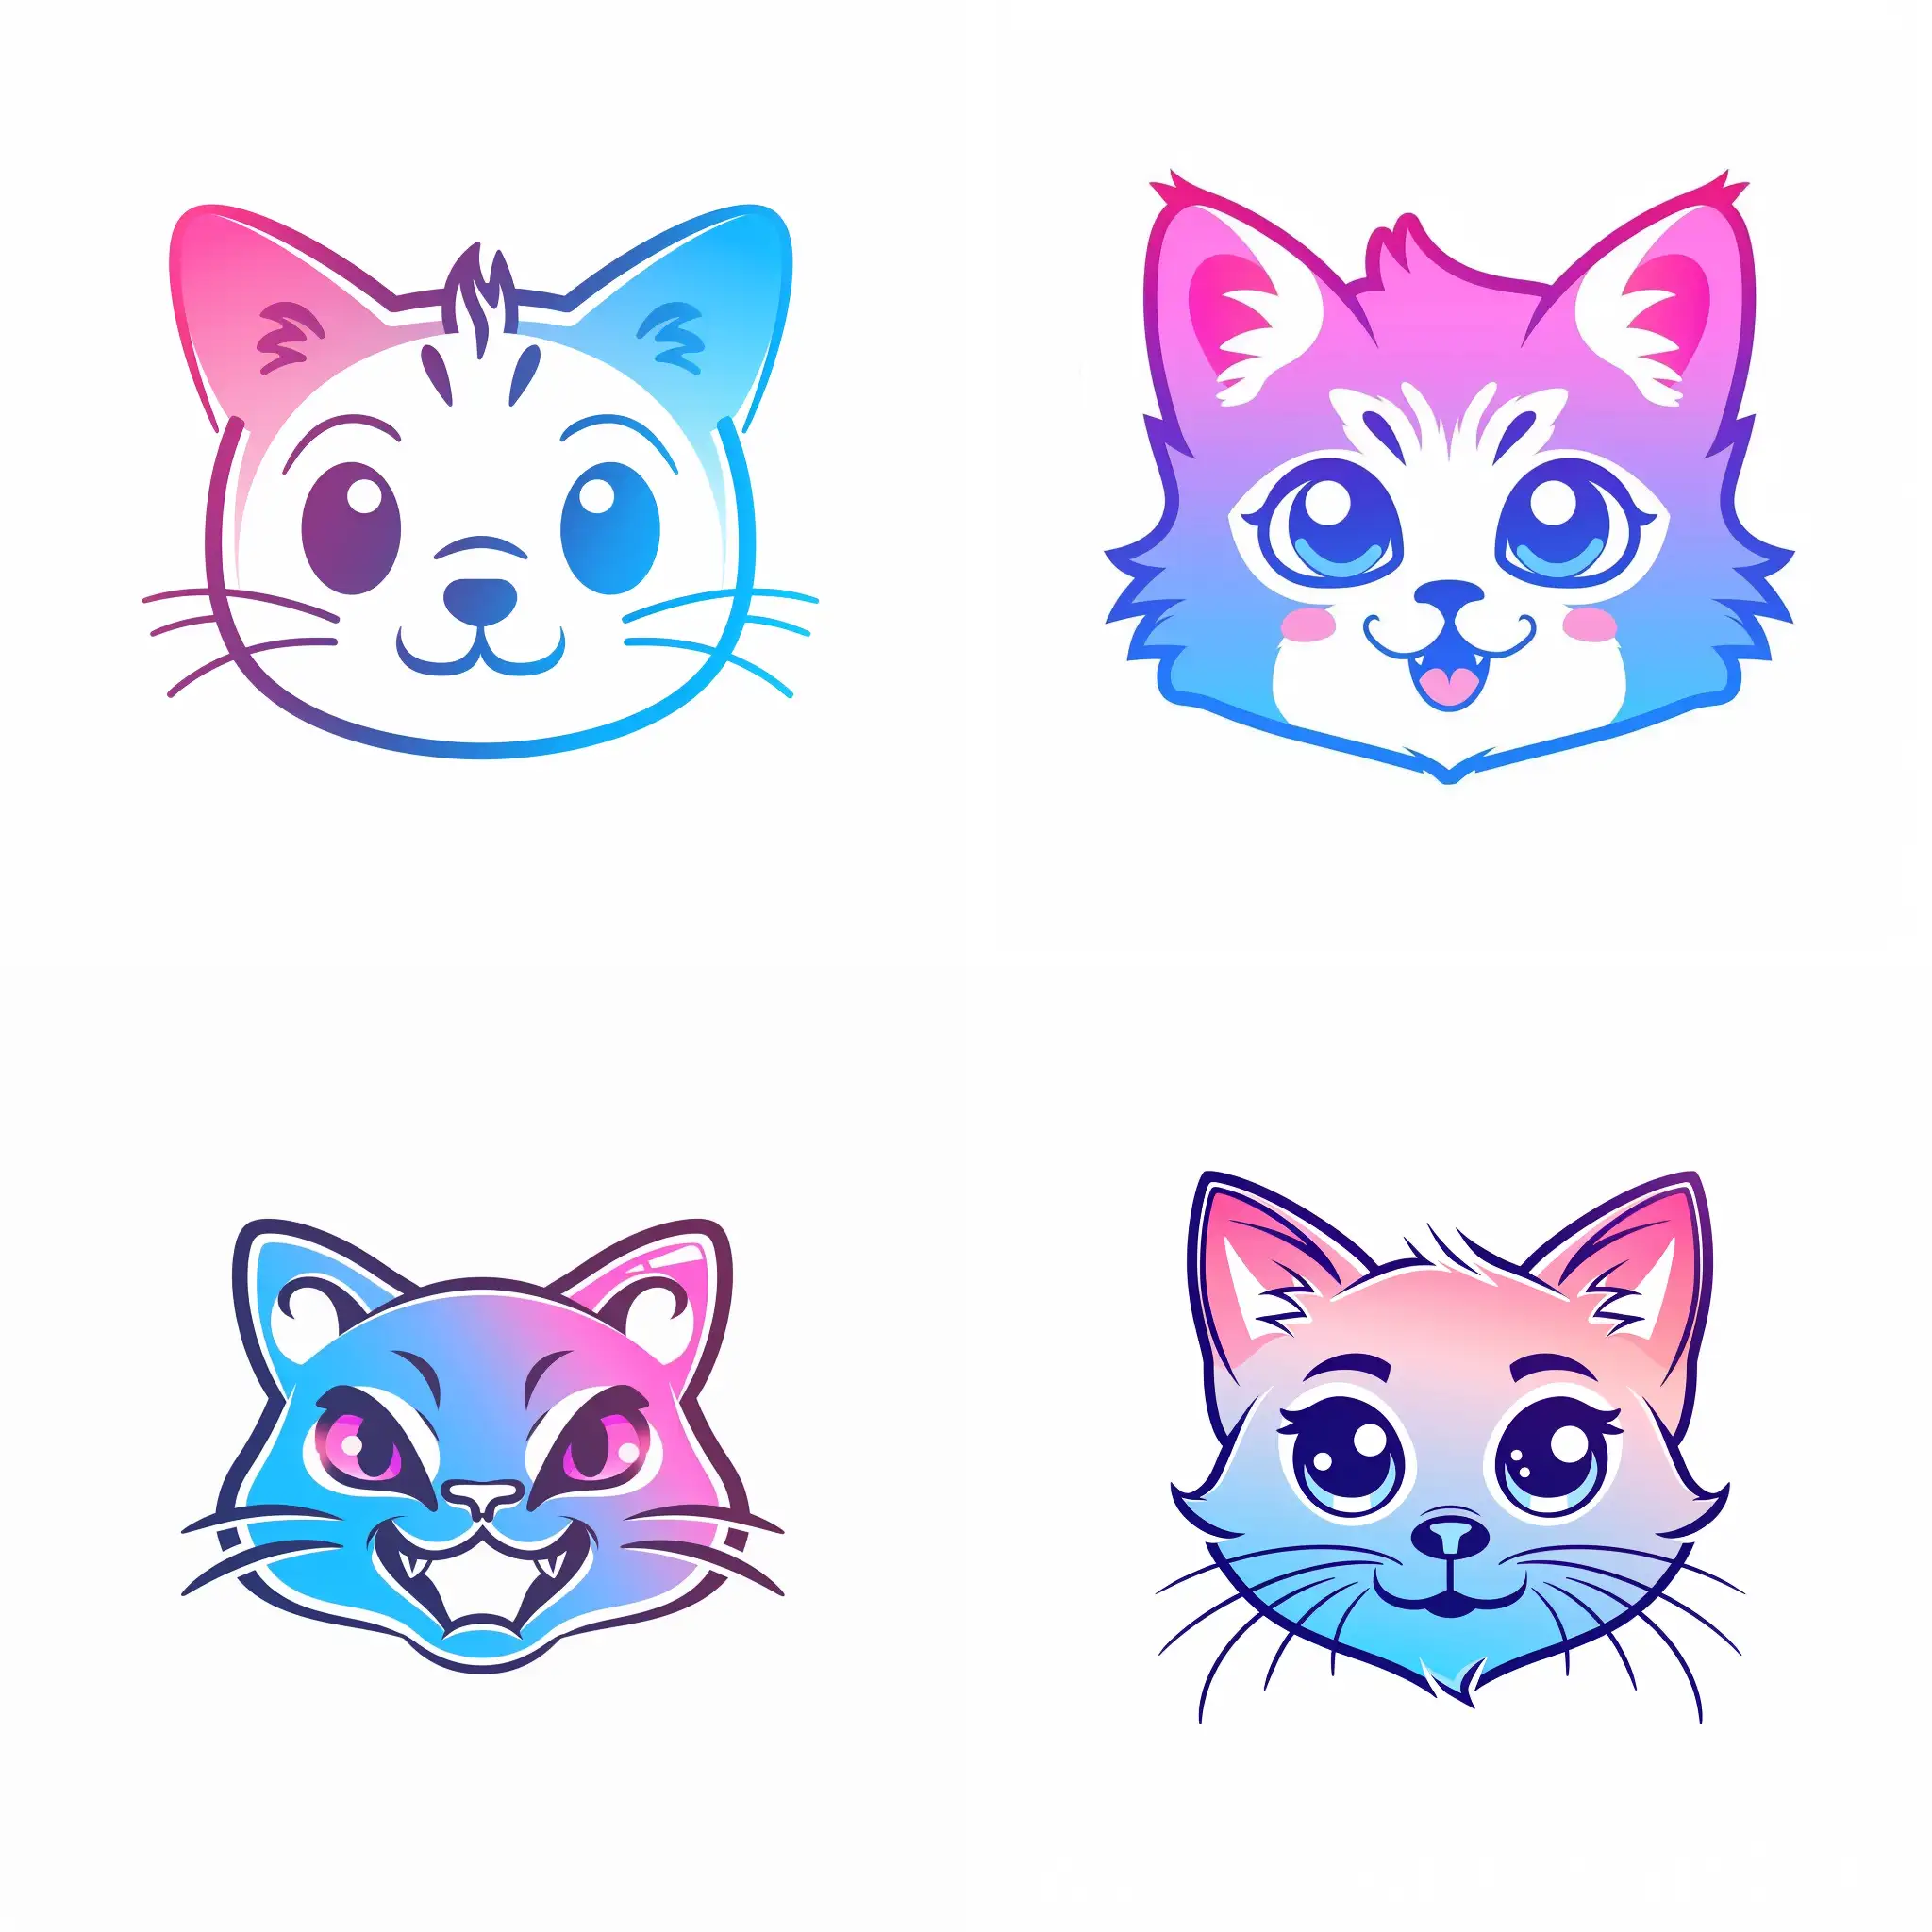 Make a logo with funny and crazy kitten's face. Use Blue to pink gradient. Background is white. Simple cartoon style.